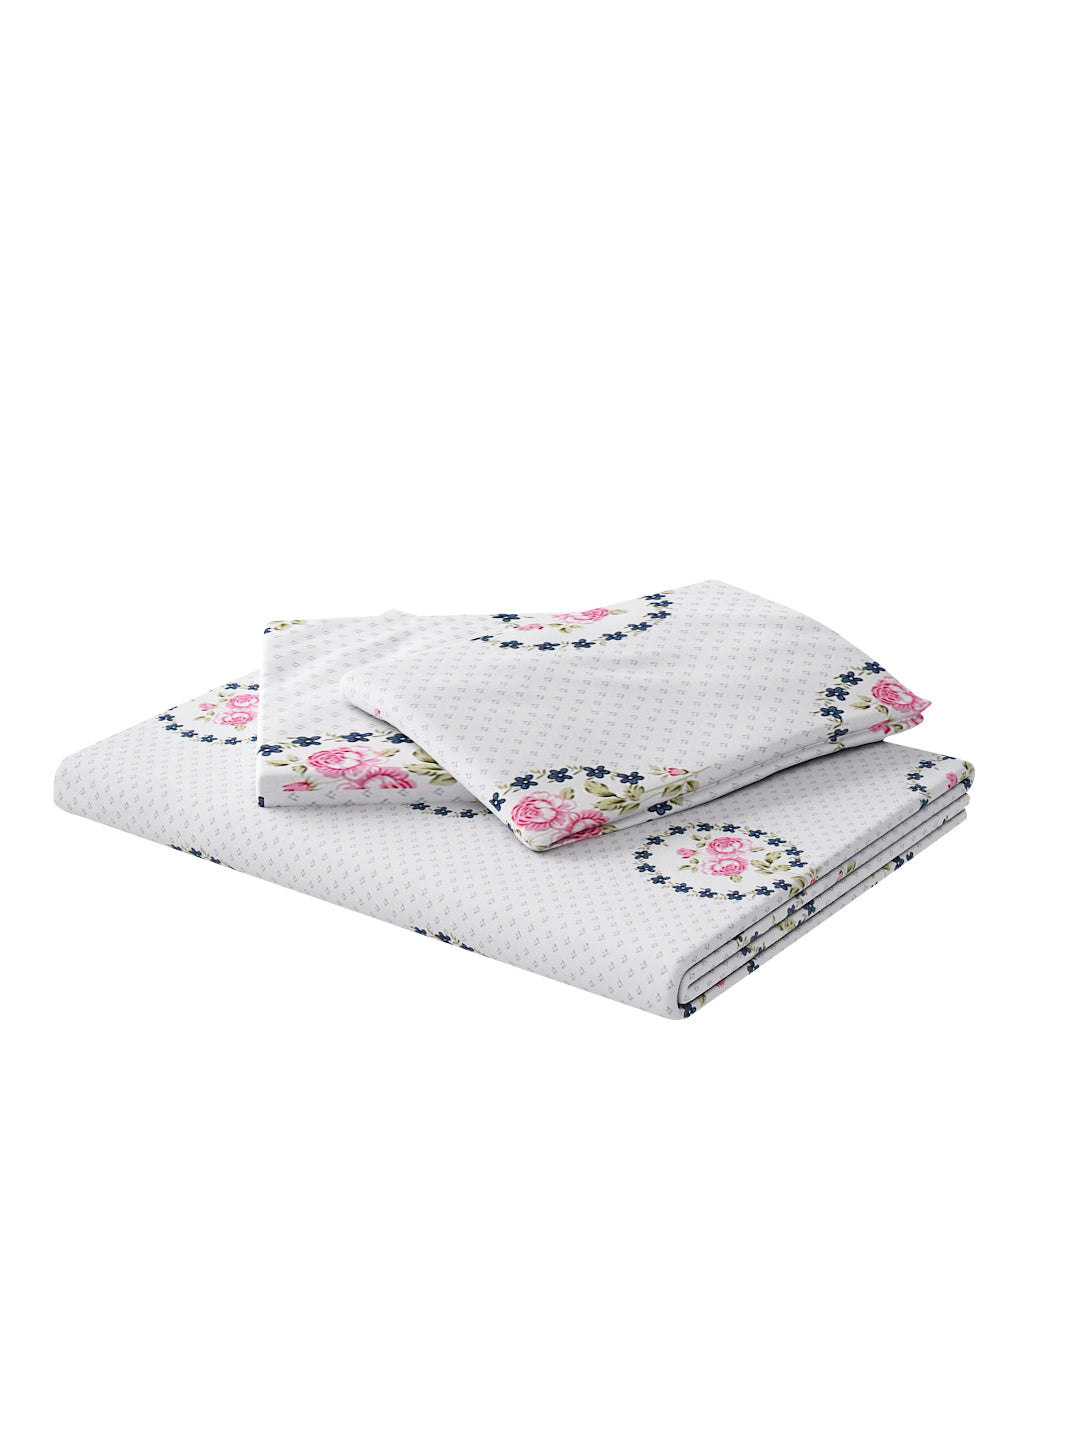 180 TC Double Bed Cotton Bedsheet with 2 Pillow Covers-Blue,Pink,White